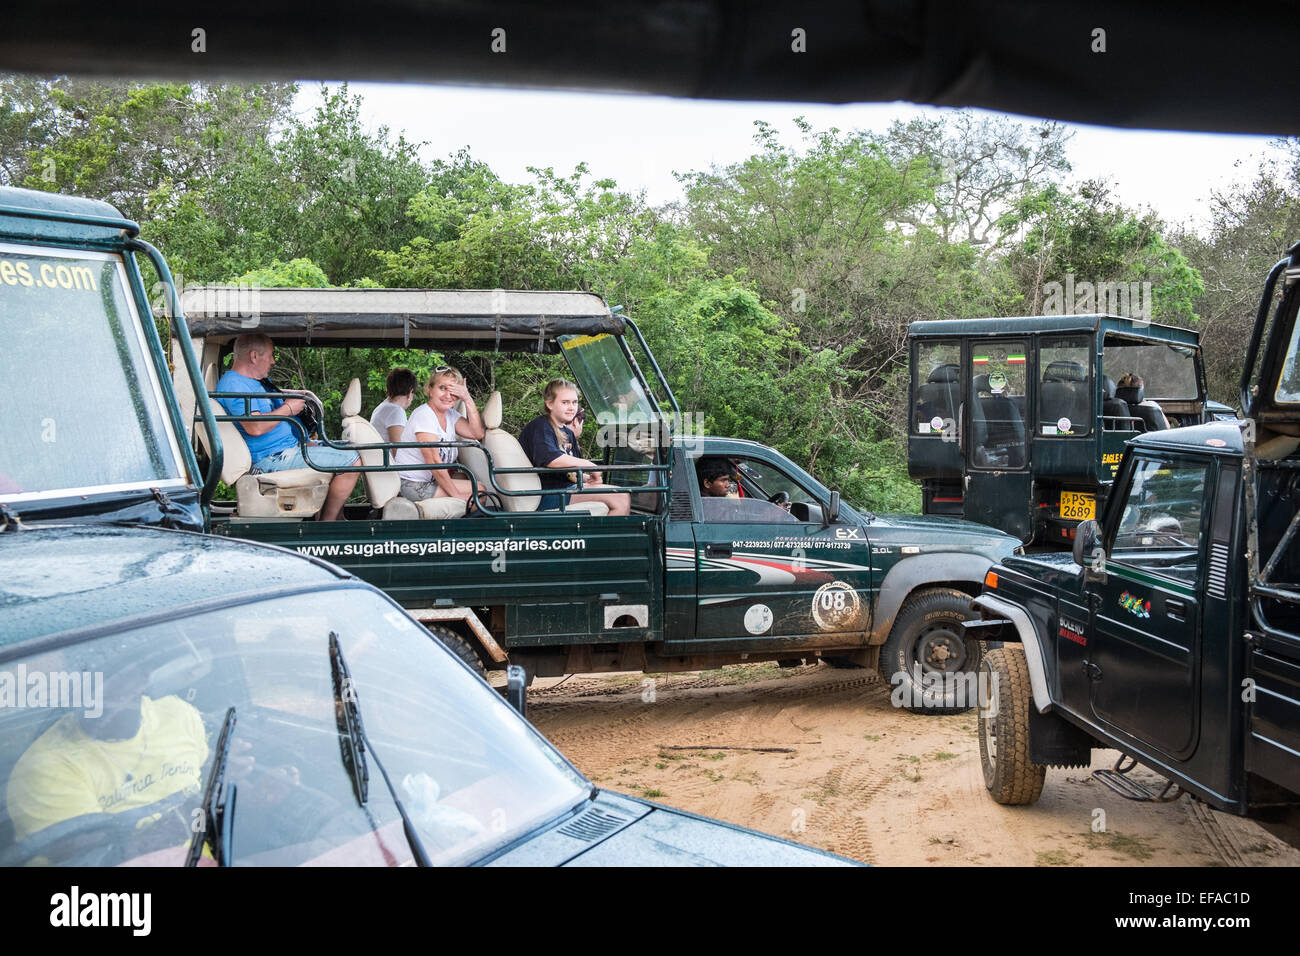 Tourists in jeeps traffic jams while chasing wildlife,especially leopards,in packs of vehicles.Yala National Park,Sri Lanka. Stock Photo